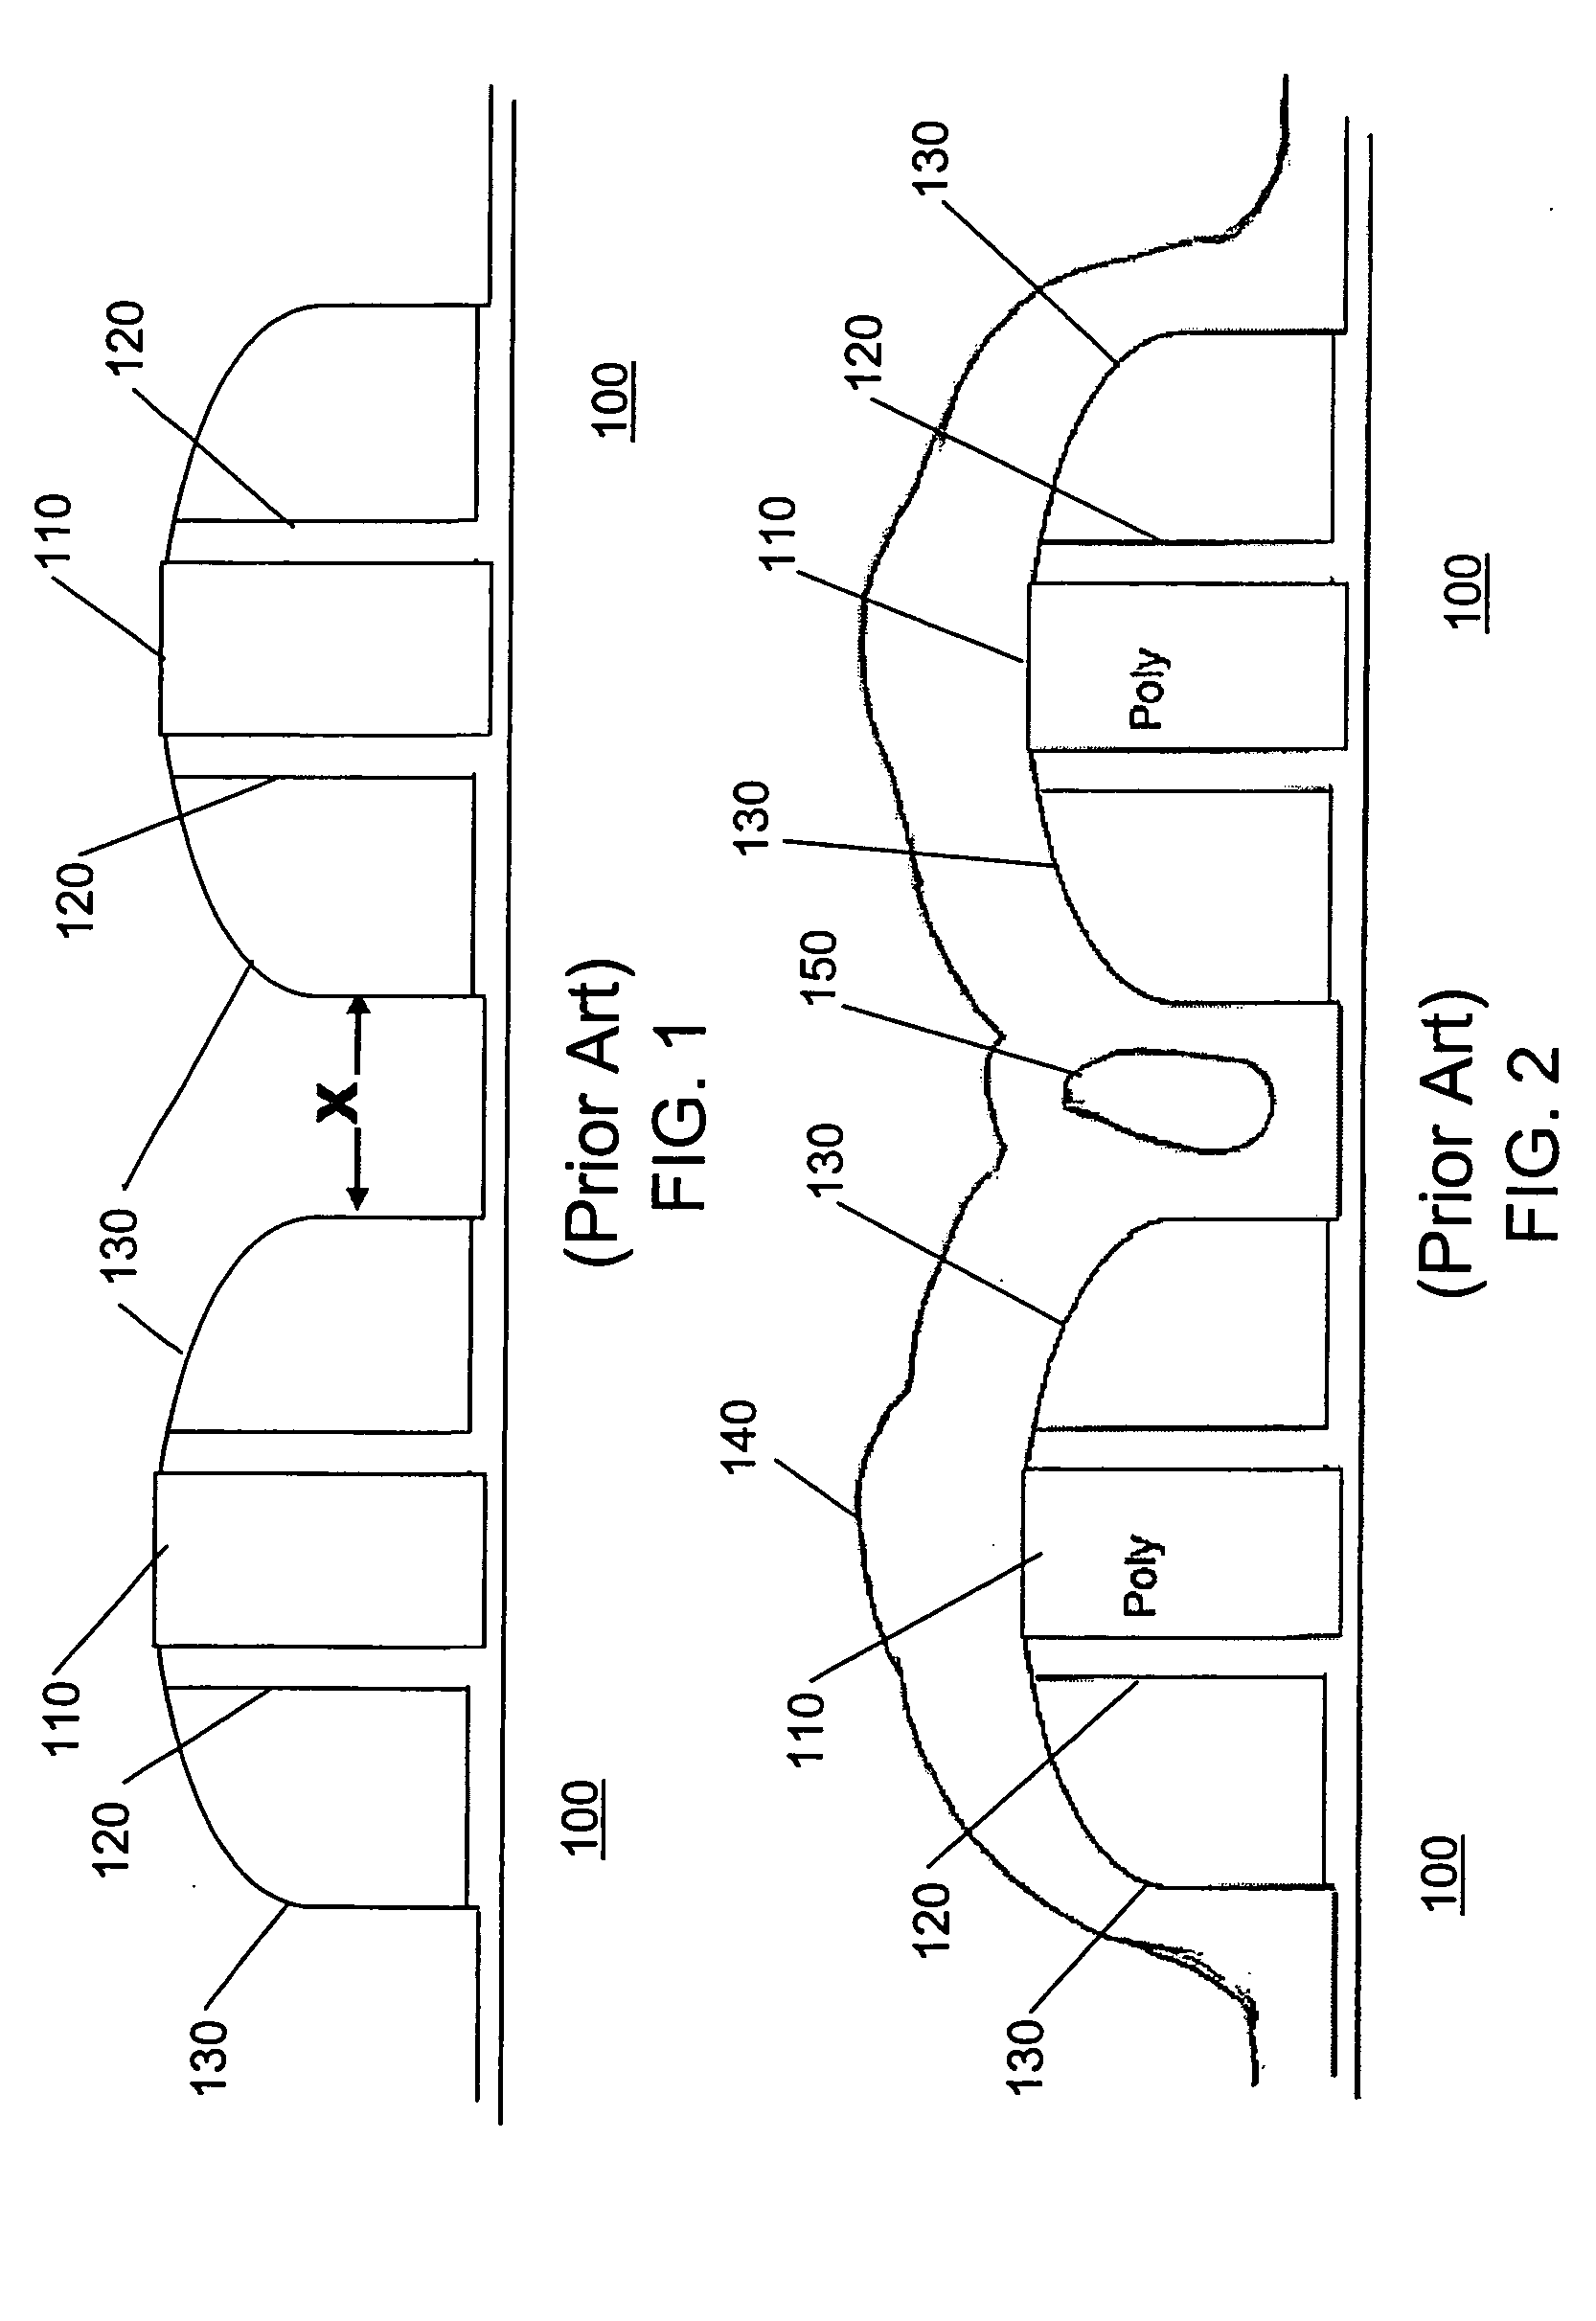 Atomic layer deposition for filling a gap between devices